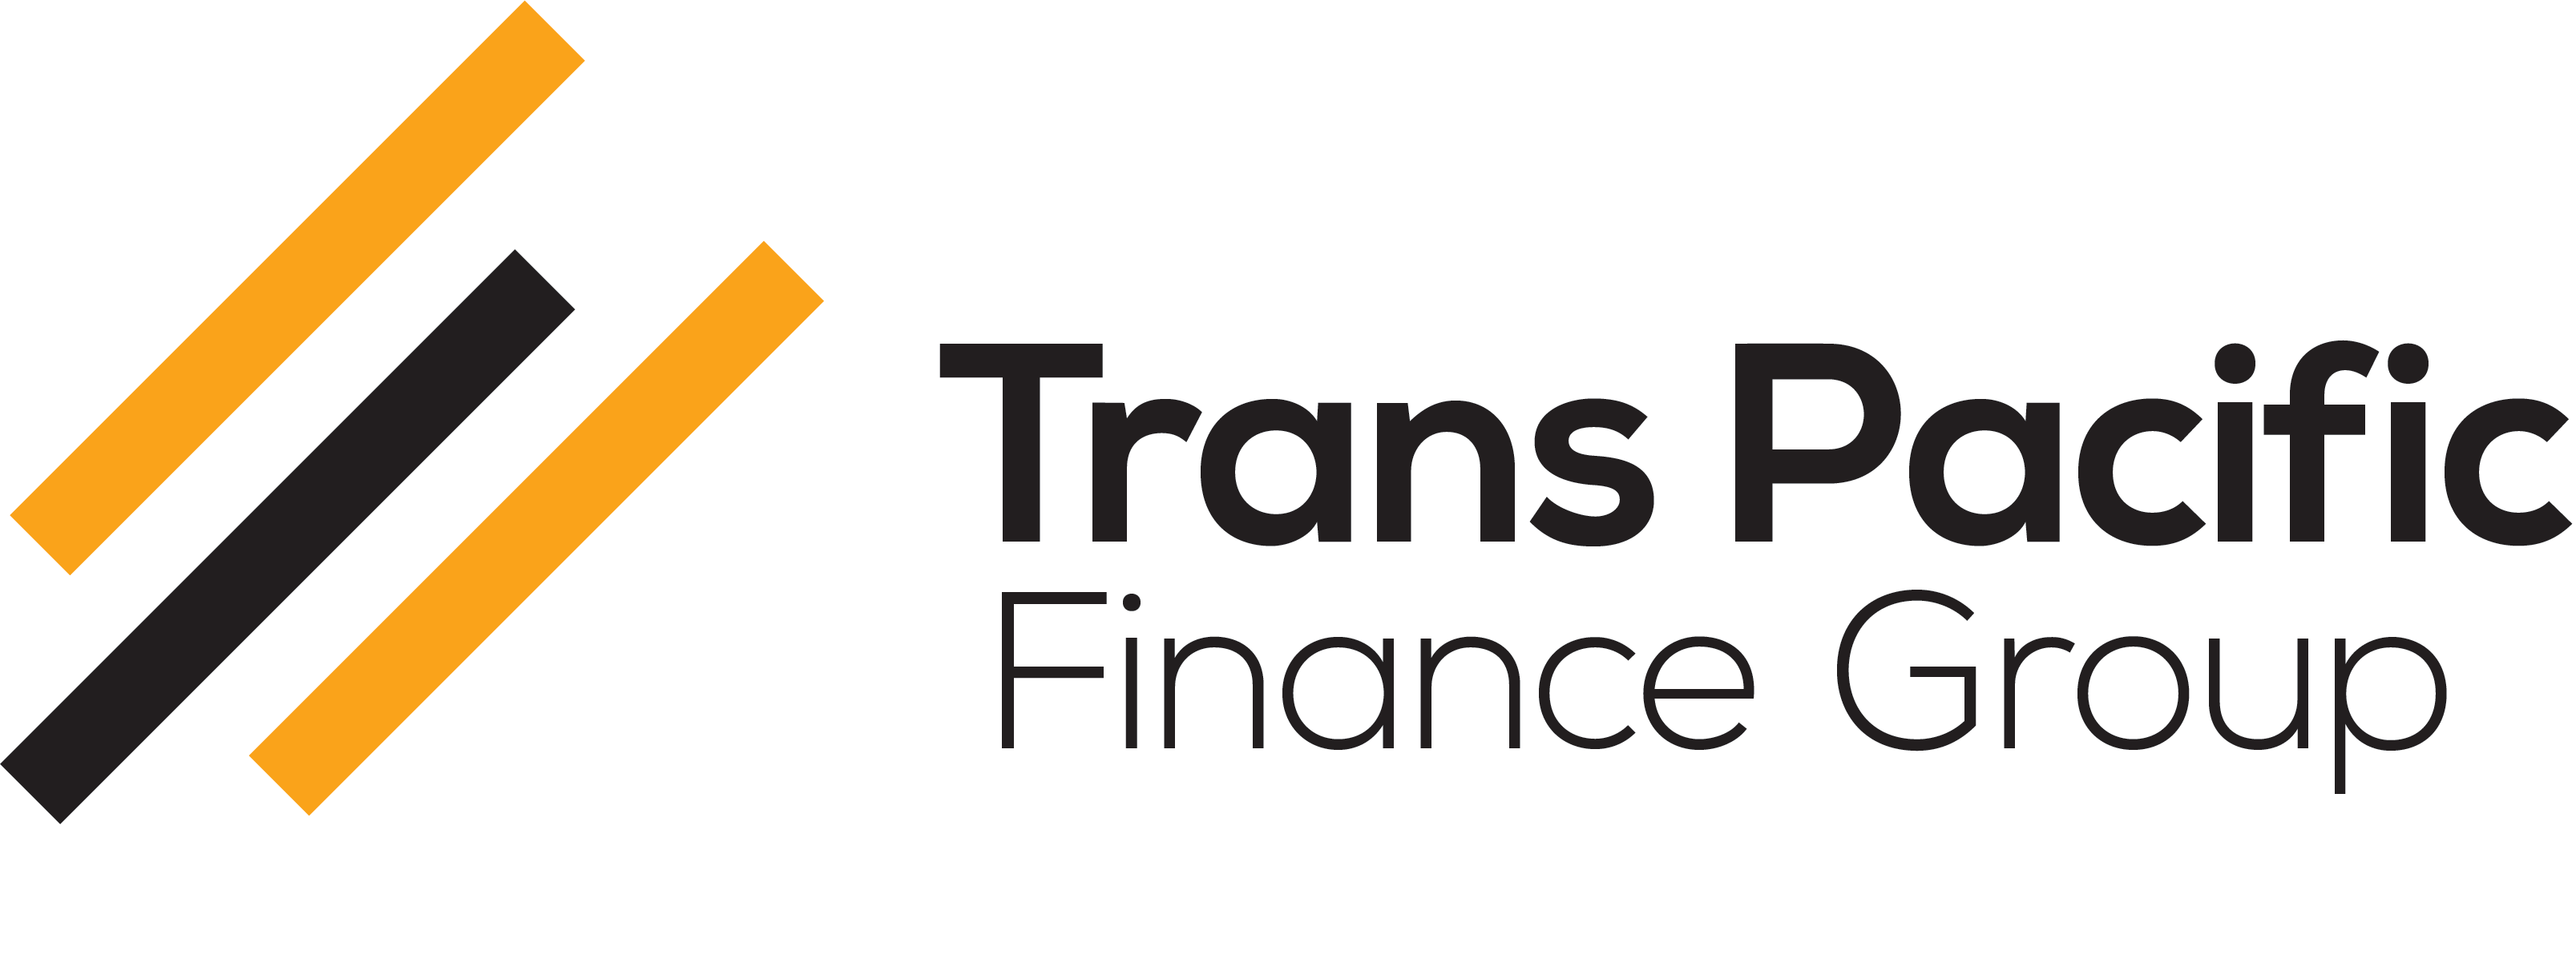 Trans Pacific Finance Group